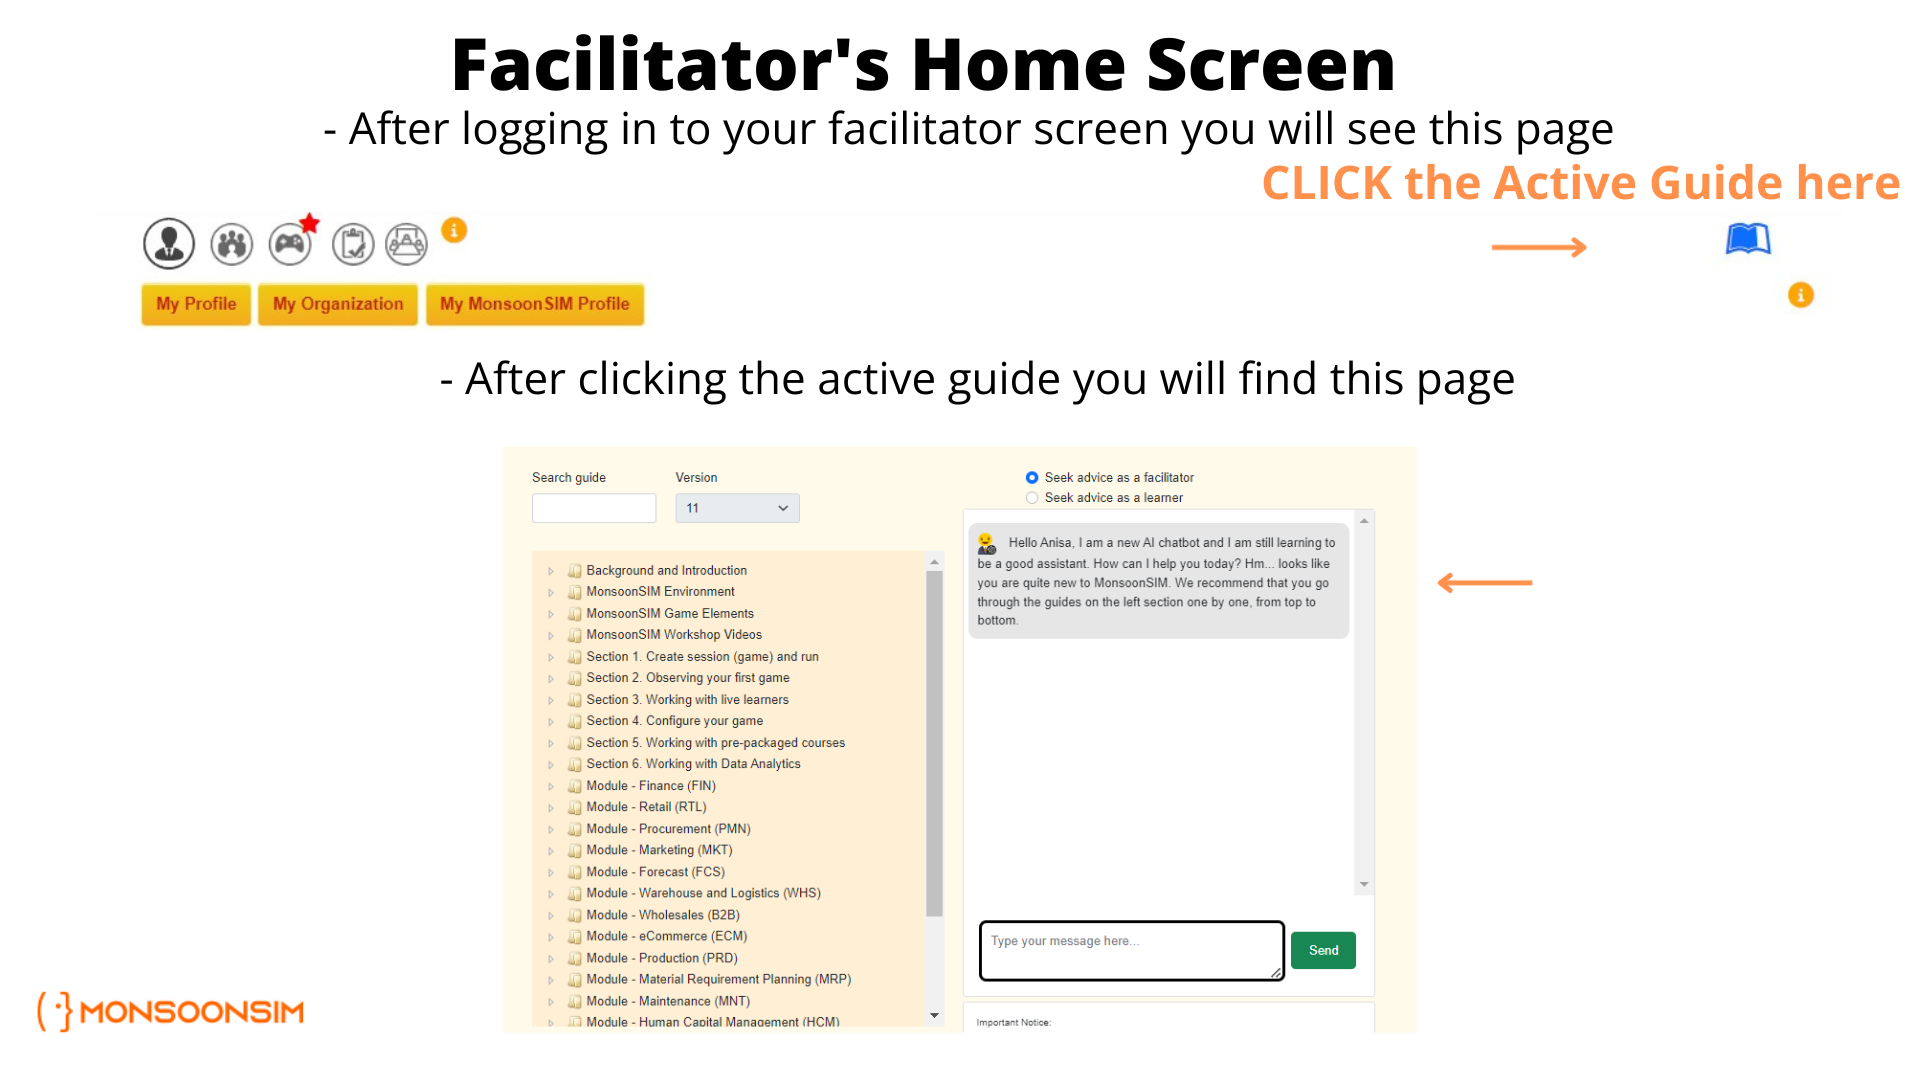 Screenshot of MonsoonSIM Facilitator's Home Screen after login, highlighting the 'Active Guide' feature. The image displays the MonsoonSIM dashboard with tabs for 'My Profile', 'My Organization', and 'My MonsoonSIM Profile'. A secondary screen shows the detailed guide with a list of modules and sections, including an interactive chat support feature